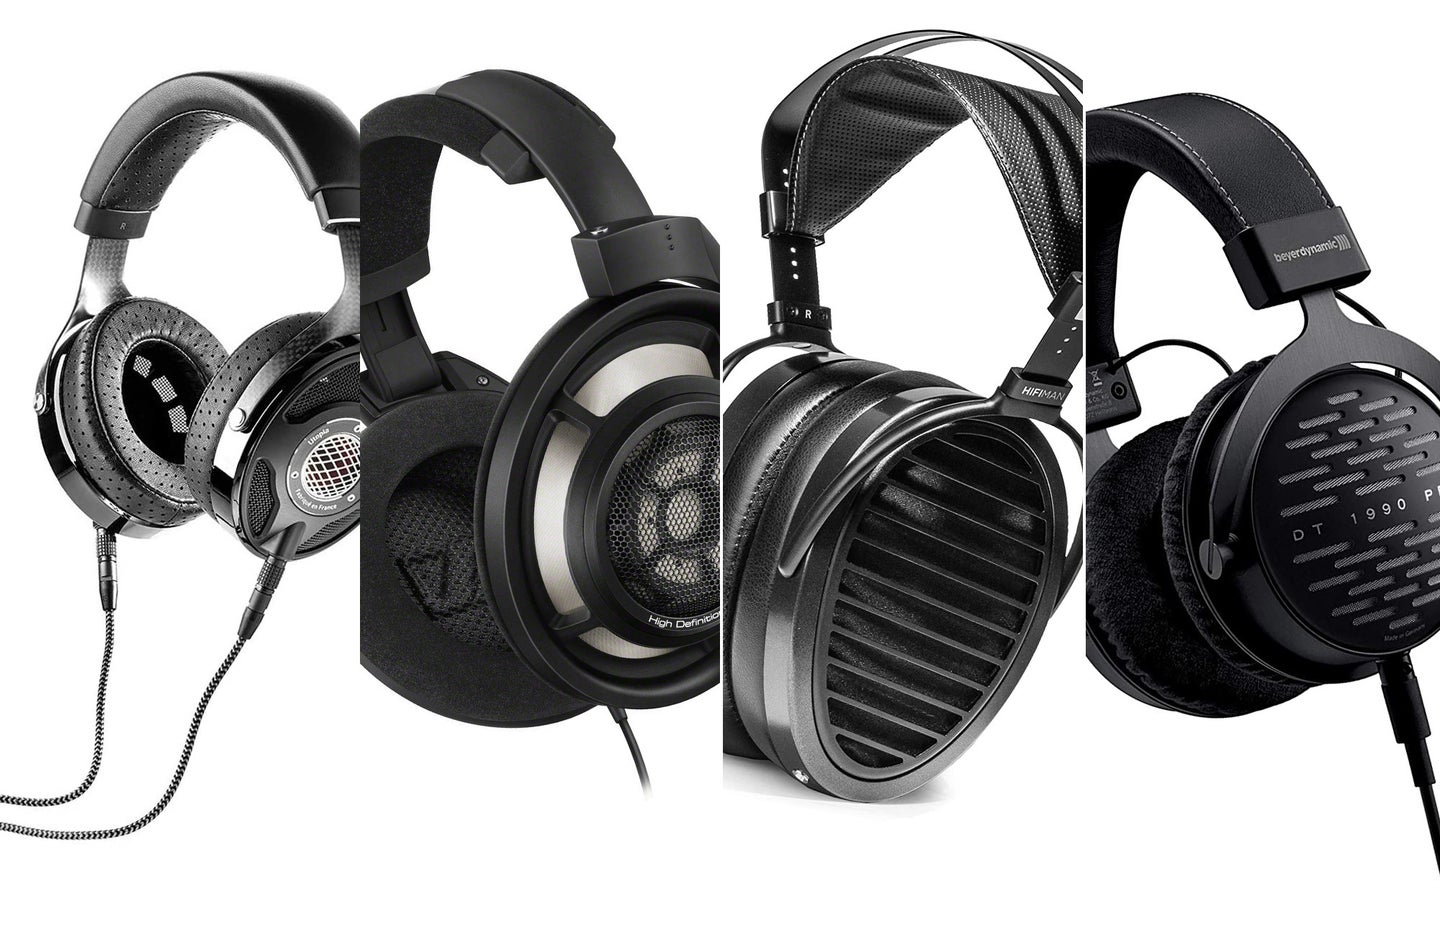 a line-up of headphones on a white background